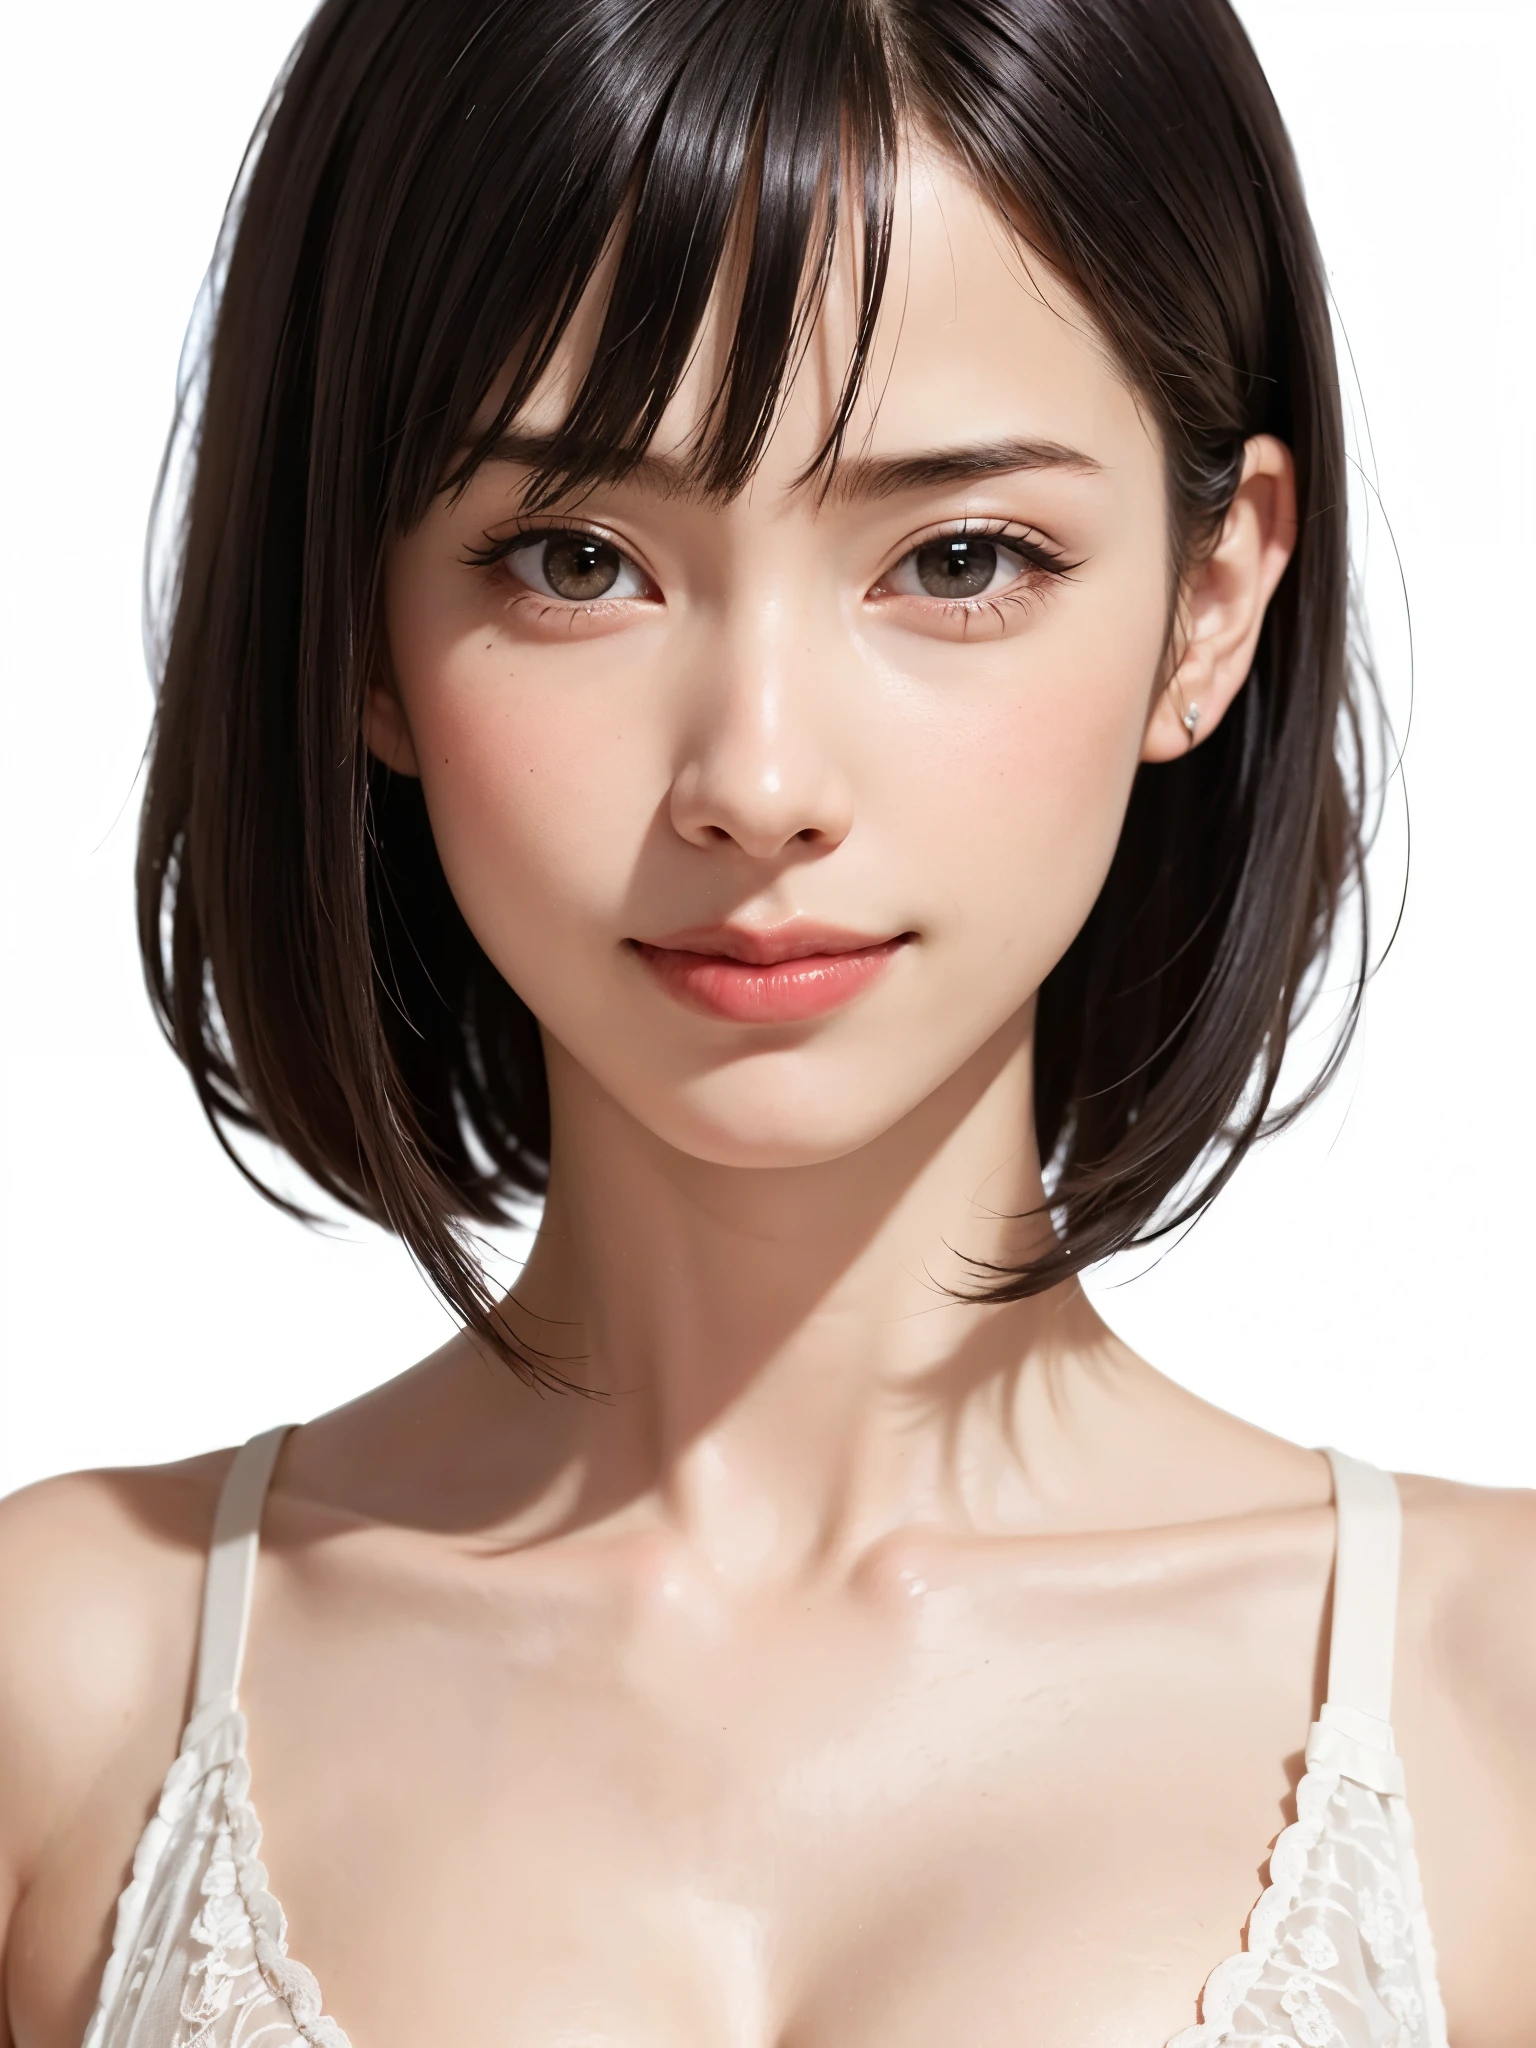 1 girl, alone, Shiny skin, chest, Very detailed, Super detailed, Ultra-high resolution, whole body, (フォトrealism:1.6、Put out your ears), (highest quality), (Best Shadow),realism:1.6 details, Perfect lighting, Black Hair, ((Showpiece, highest quality, High precision、Beautiful face in symmetry、Golden Ratio、Ultra-high resolution)), One Girl, (big chest, Realistic: 1.4), (look up at the camera even a little, カメラをlook up, look up, look up at the camera, Looking into the camera))), alone, , White Background, snow-White Background, shut up., smile, pretty Black Hair, short hair, Big eyes, Transparent double eyelids, eyelash, listen, Long neck, Long neck, Absolute area, ((Face close-up, short hair with bangs)), 19 years old, Attractive proportions, Shiny skin, Beautiful clavicle, Golden Ratioの顔, Perfect Face, Teardrop-shaped mole, chestのほくろ, bangs, clean bangs, beautiful bangs, Lip gloss, Thin lips, White skin, I took off my clothes, big chest, Small face, Small face, 少し上を向いてLooking into the camera, ((smile a little for the camera, really nothing pure White Background, very big big chest, big chest))